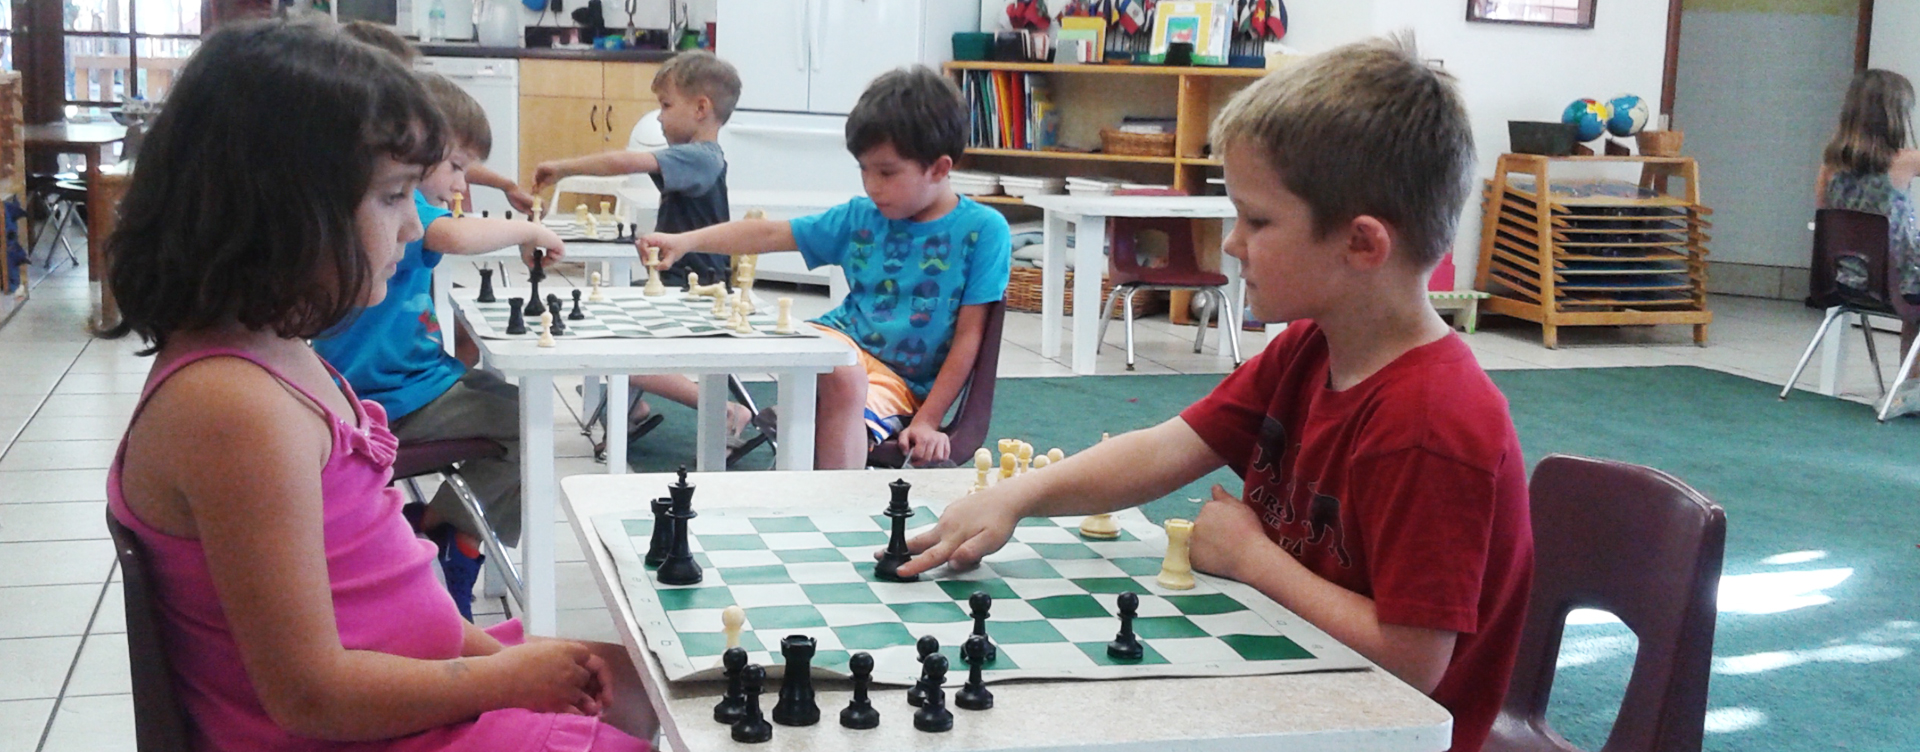 Students playing chess a school